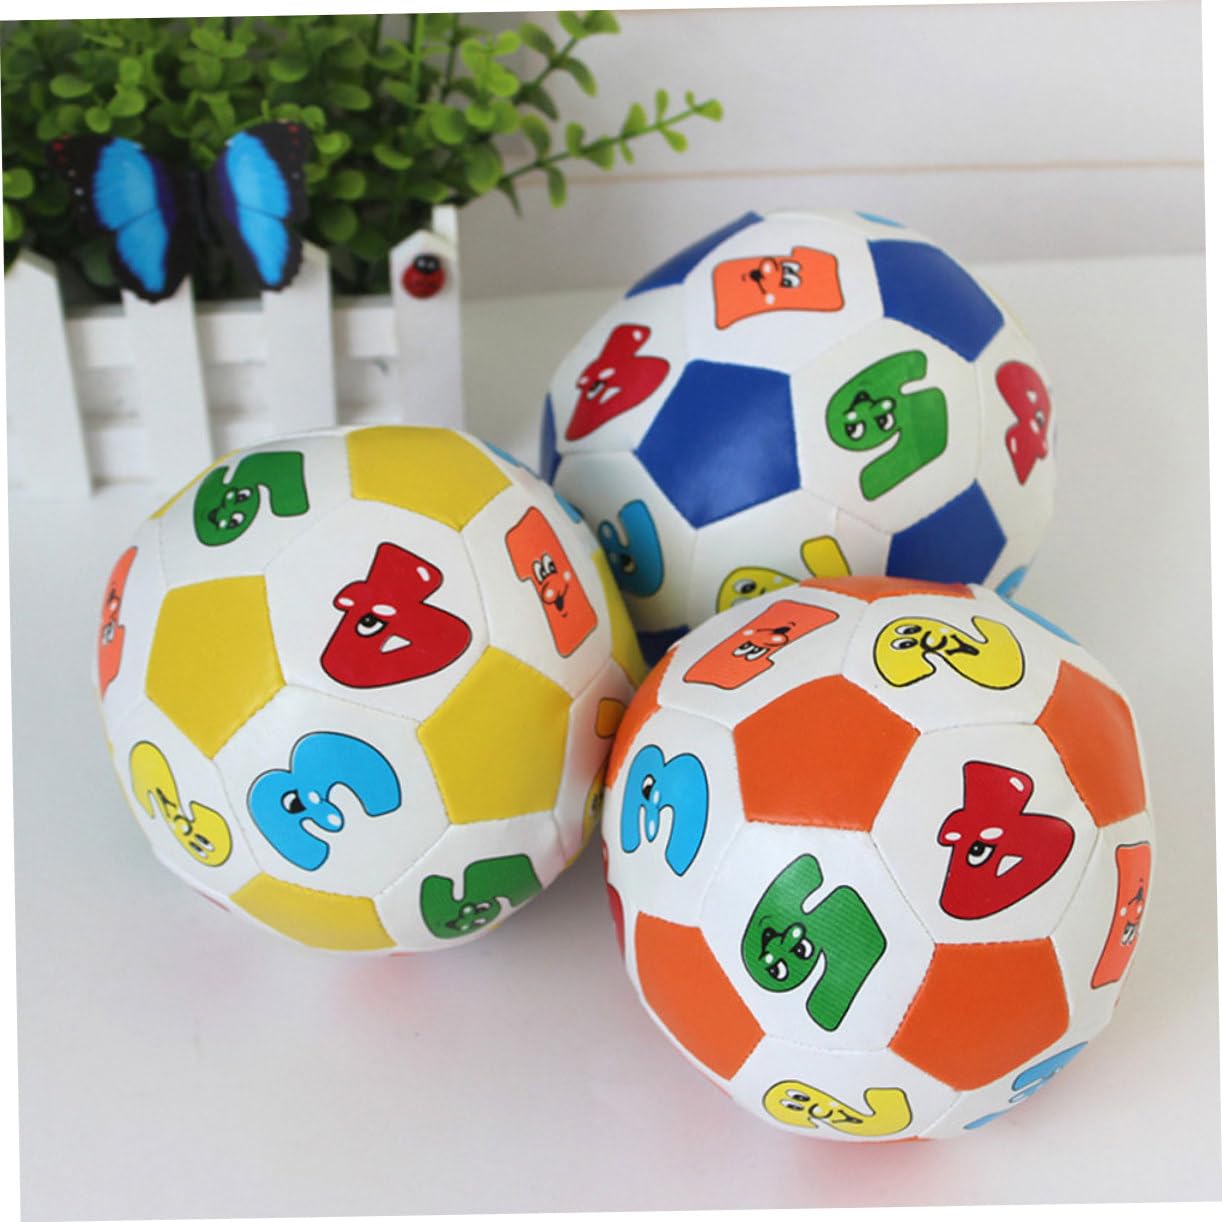 Comebachome Mini Soccer Ball, Mini Soft Ball Toy for Children Educational Toy Baby Learning Colors Number Rubber Ball, Kids Educational Toy